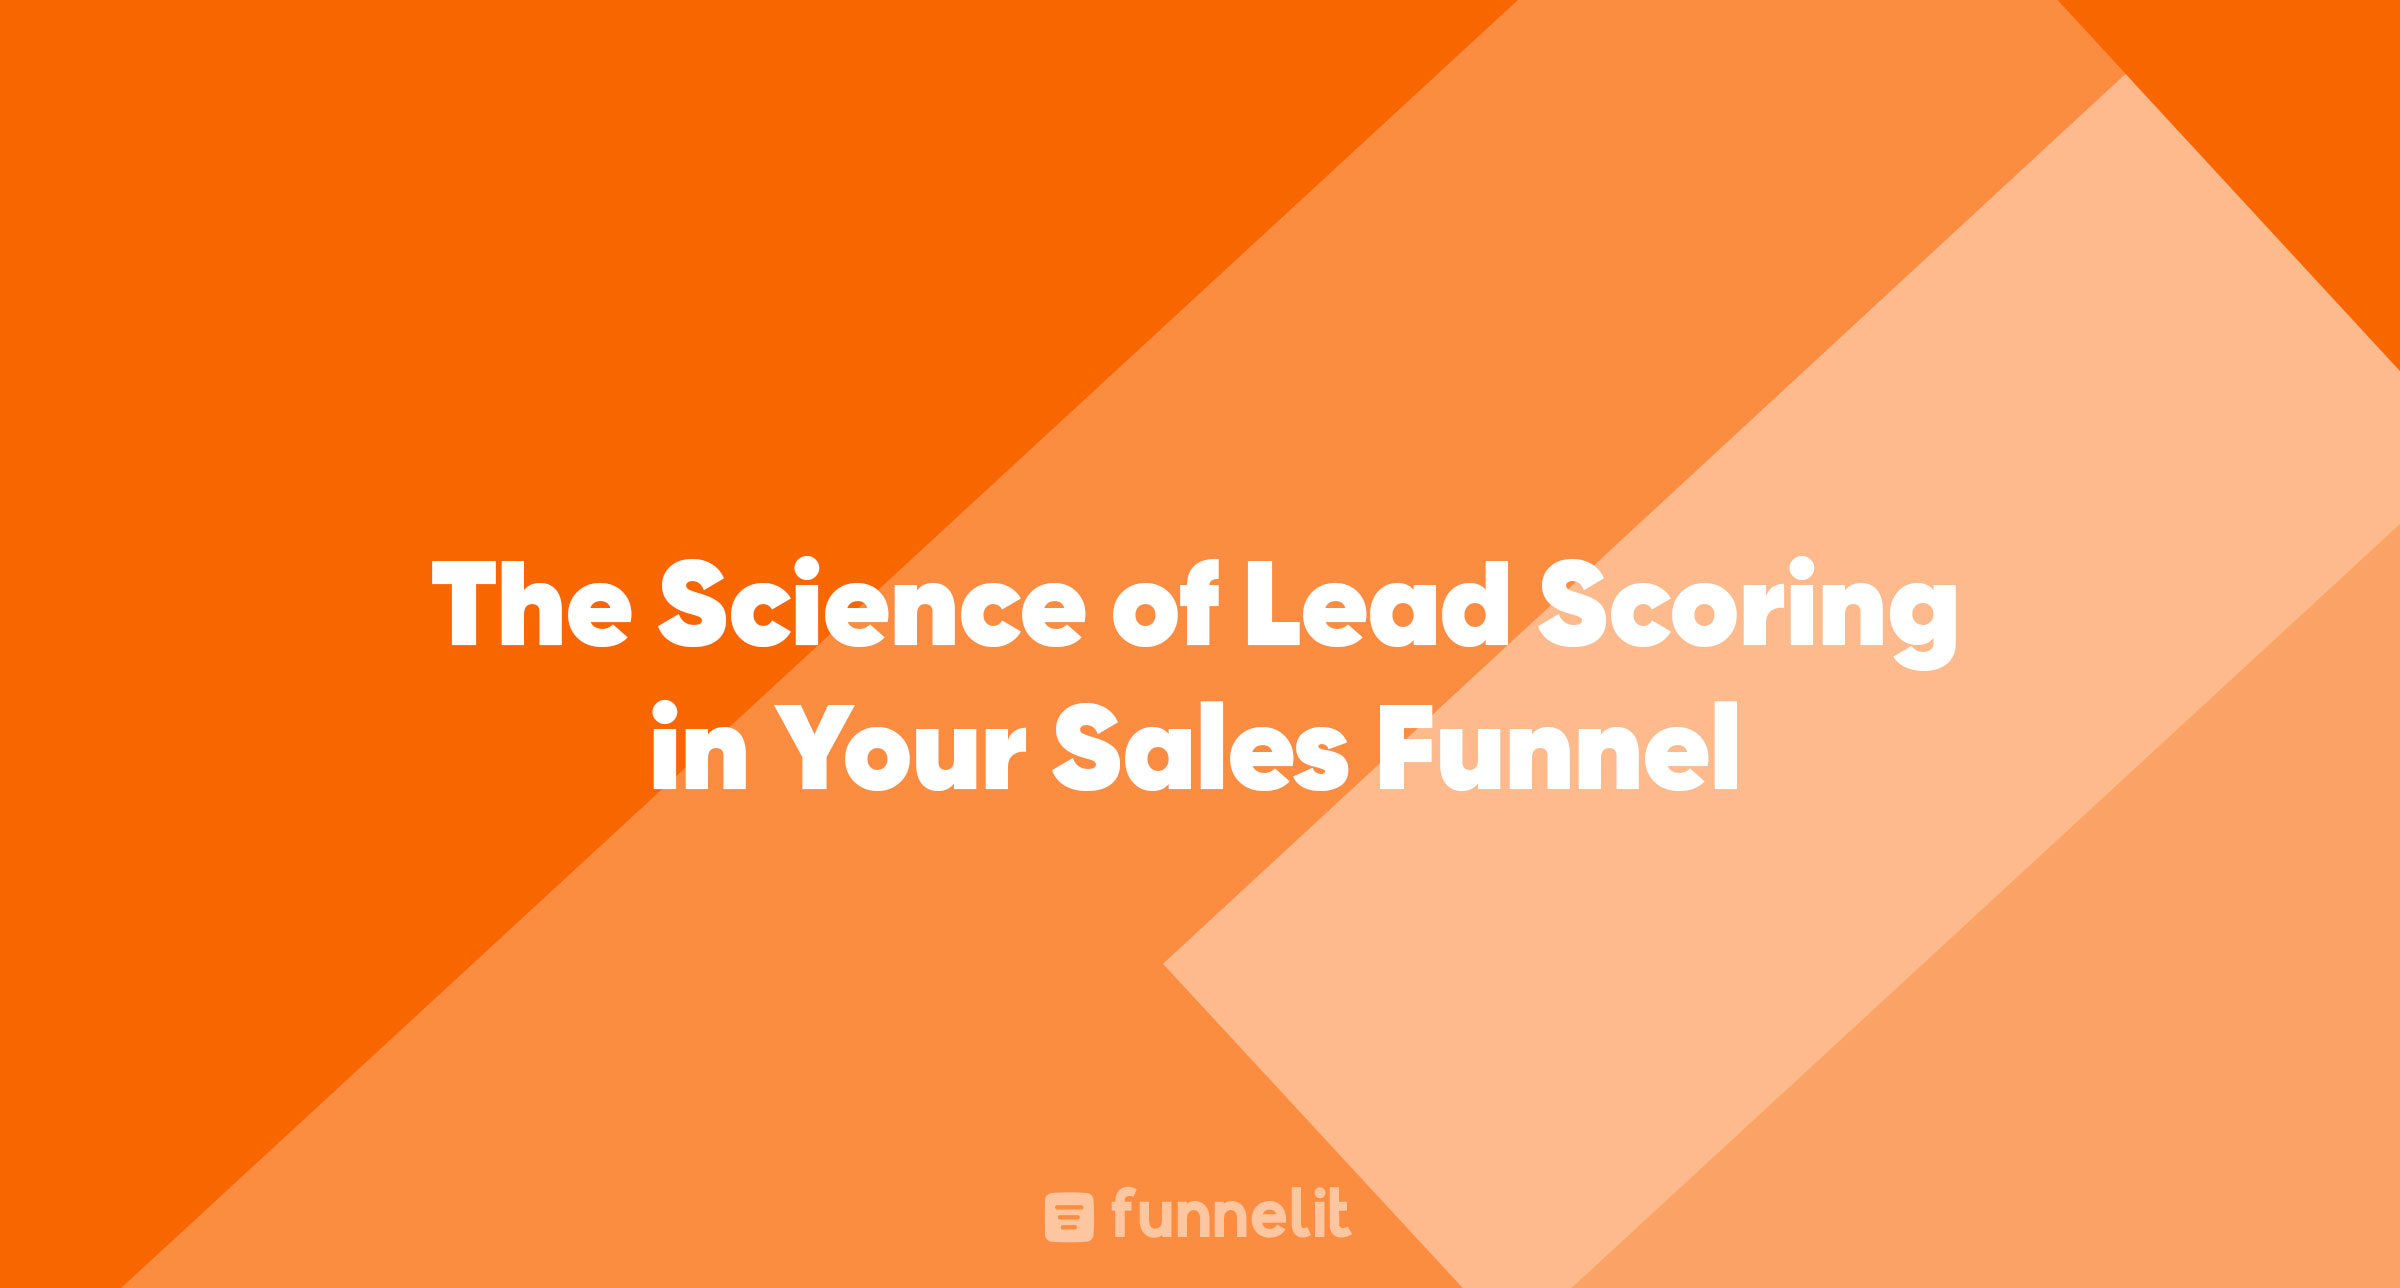 Article | The Science of Lead Scoring in Your Sales Funnel